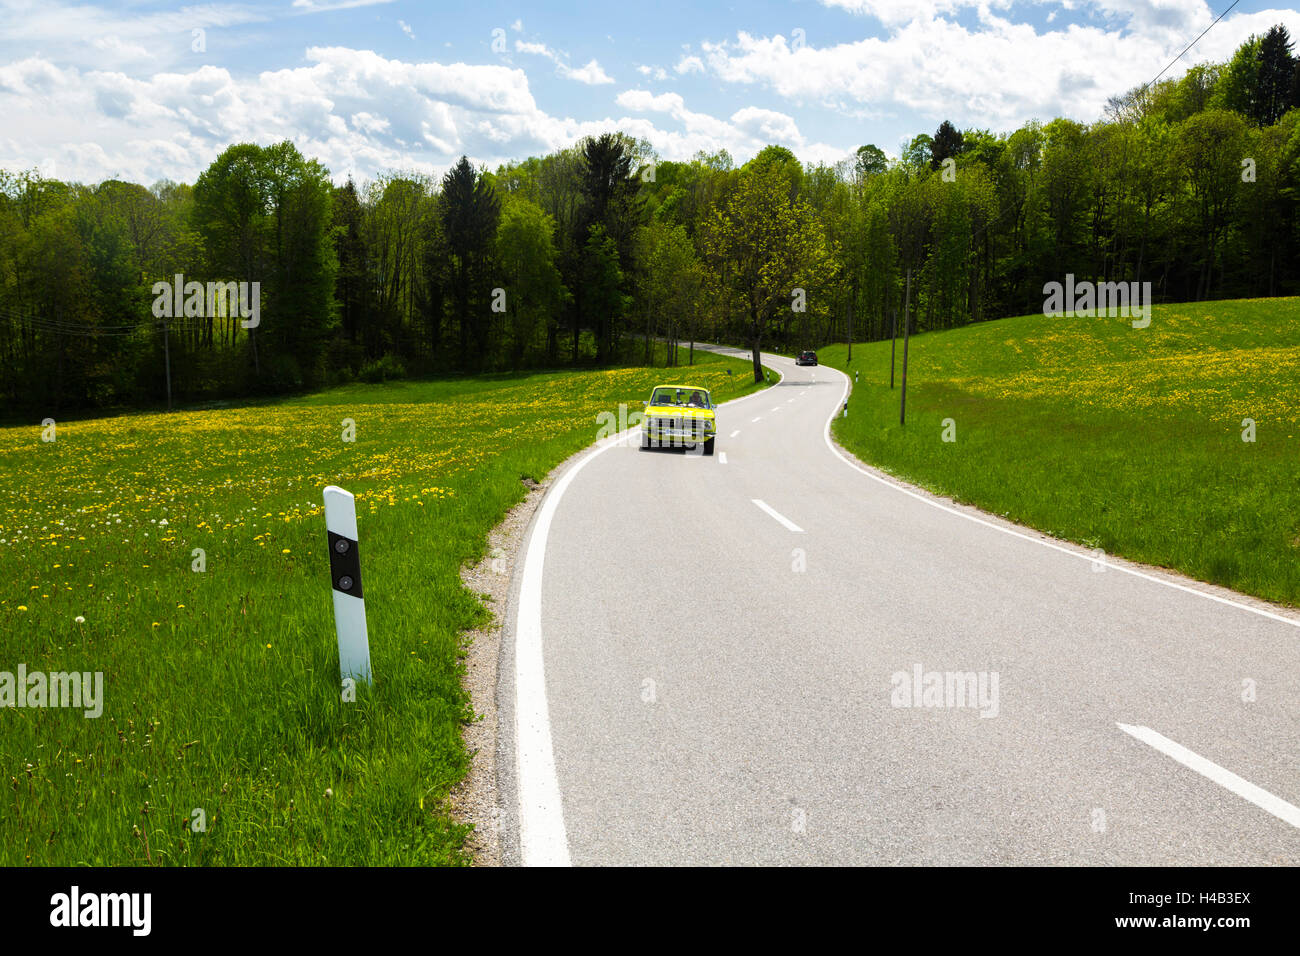 Germany, Bavaria, green car driving on country road in spring Stock Photo